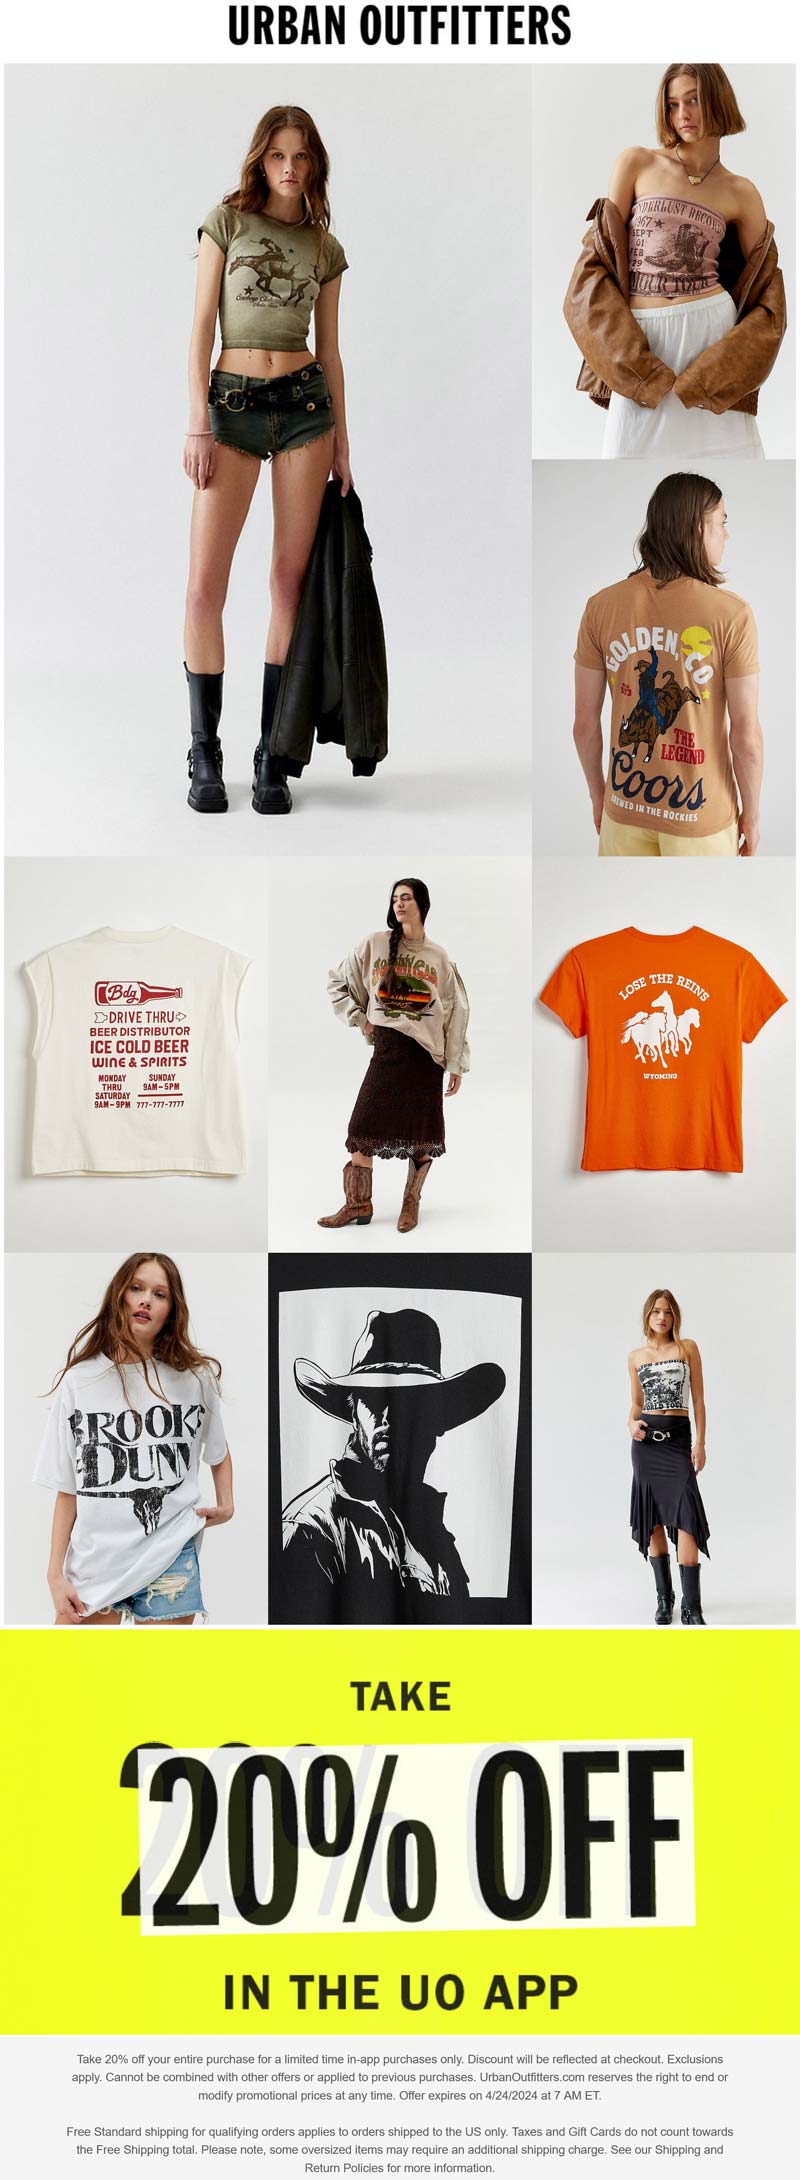 Urban Outfitters stores Coupon  20% off via mobile at Urban Outfitters #urbanoutfitters 